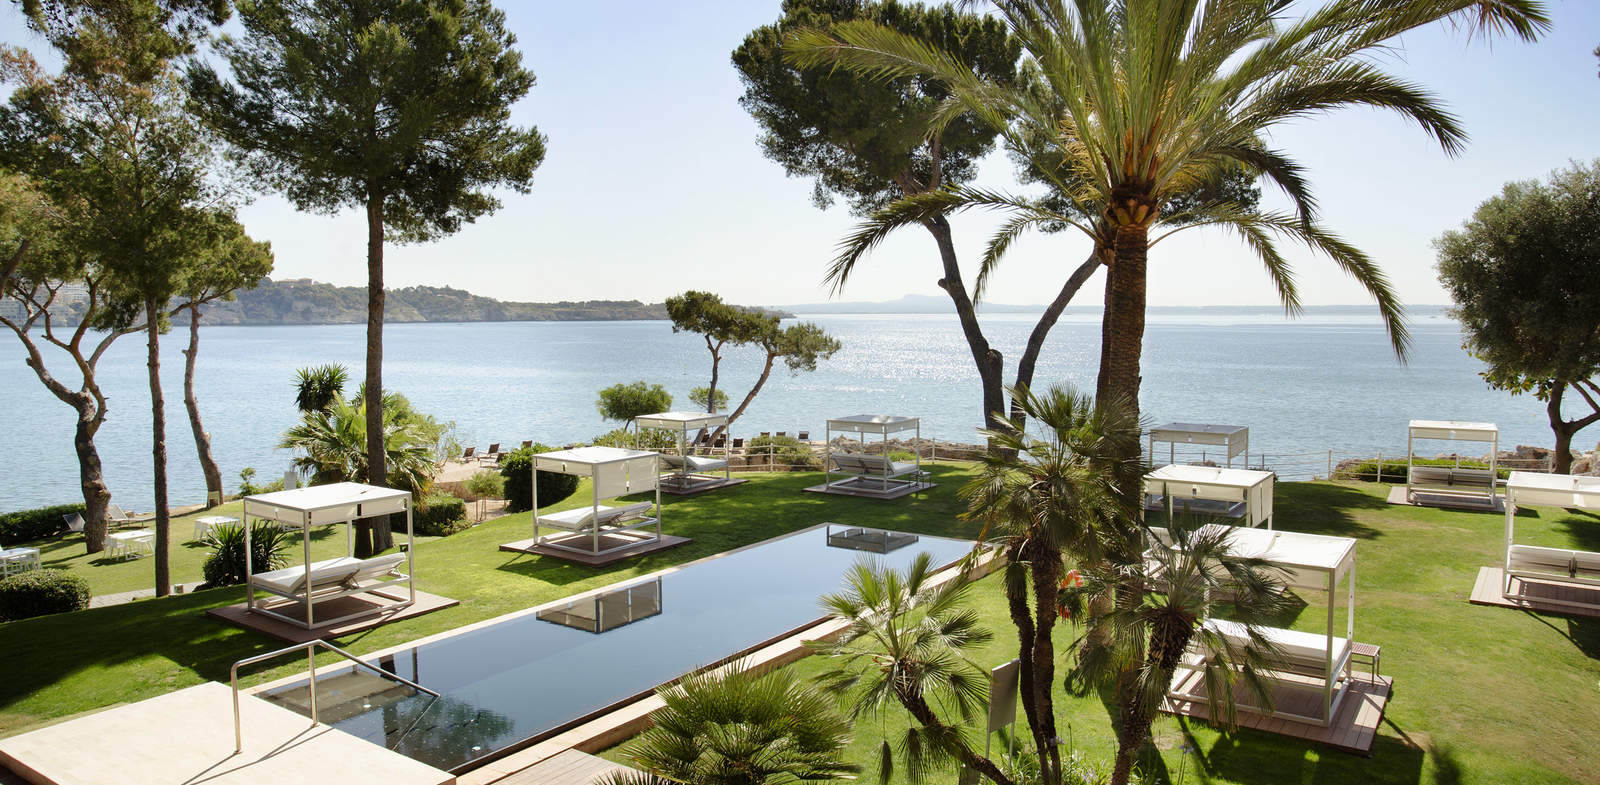 THE BEST SPA HOTELS IN MALLORCA